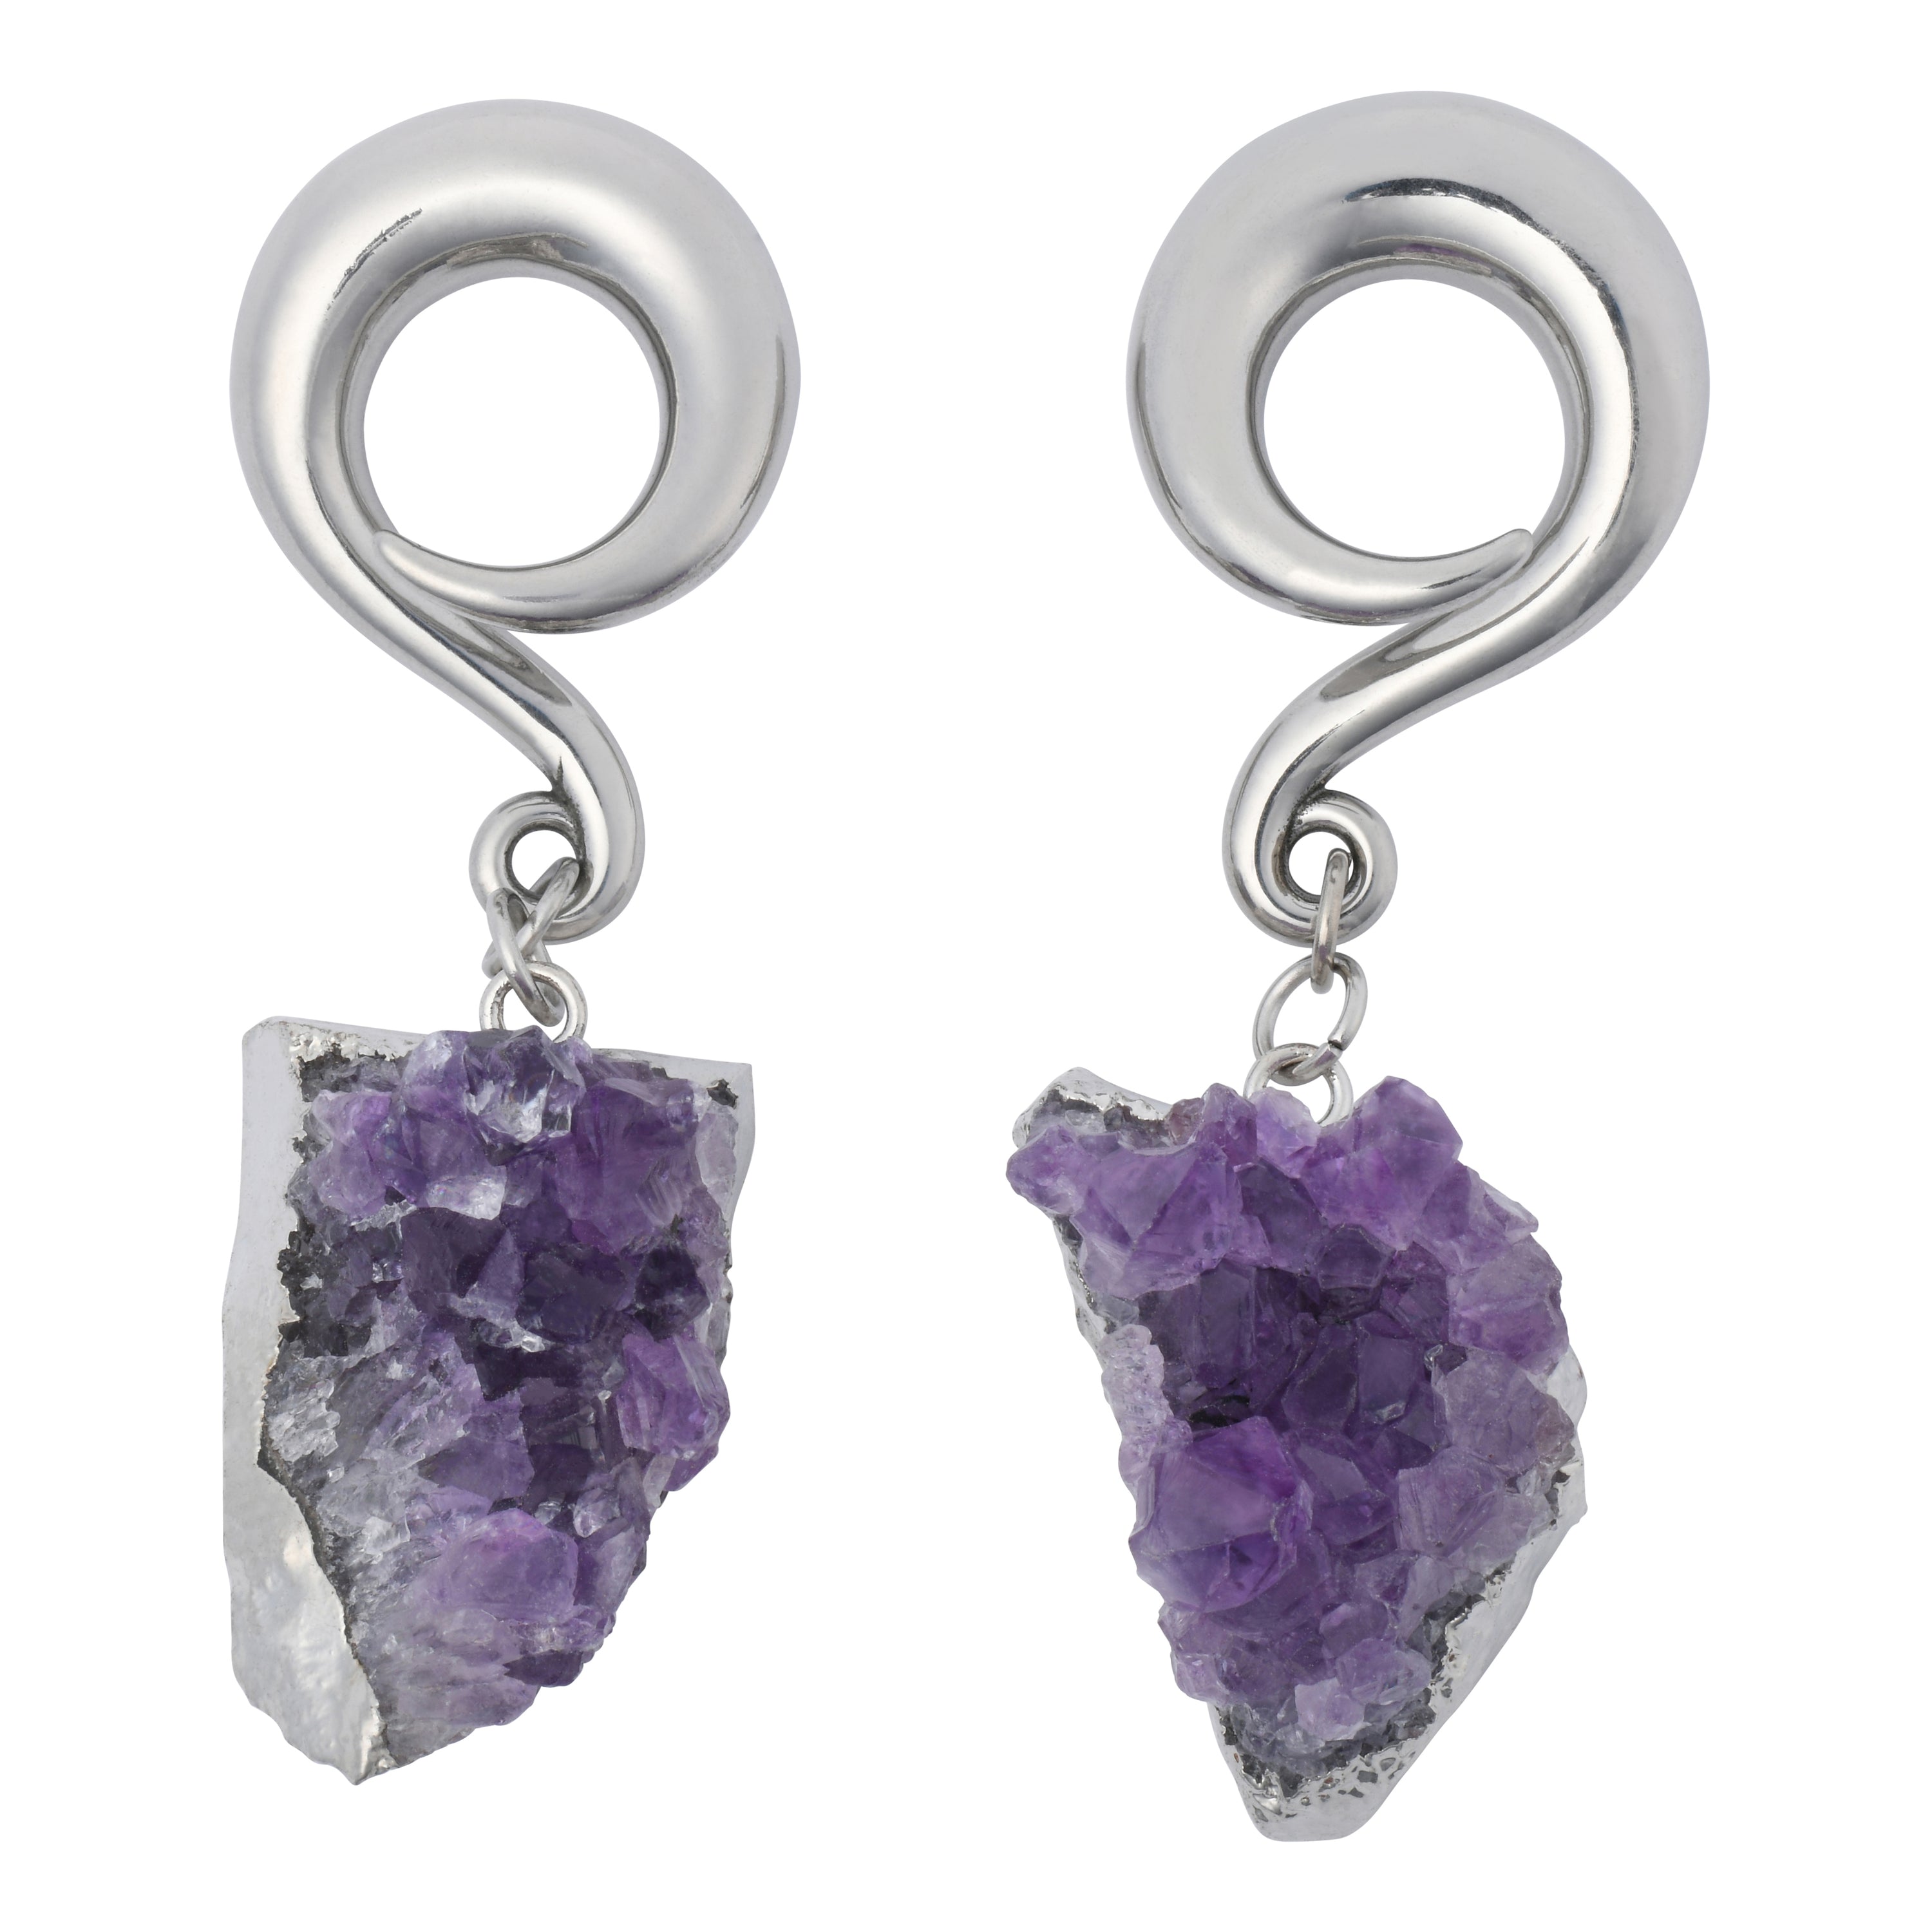 Amethyst Cluster Stainless Hangers Ear Weights 6 gauge (4mm) Stainless Steel